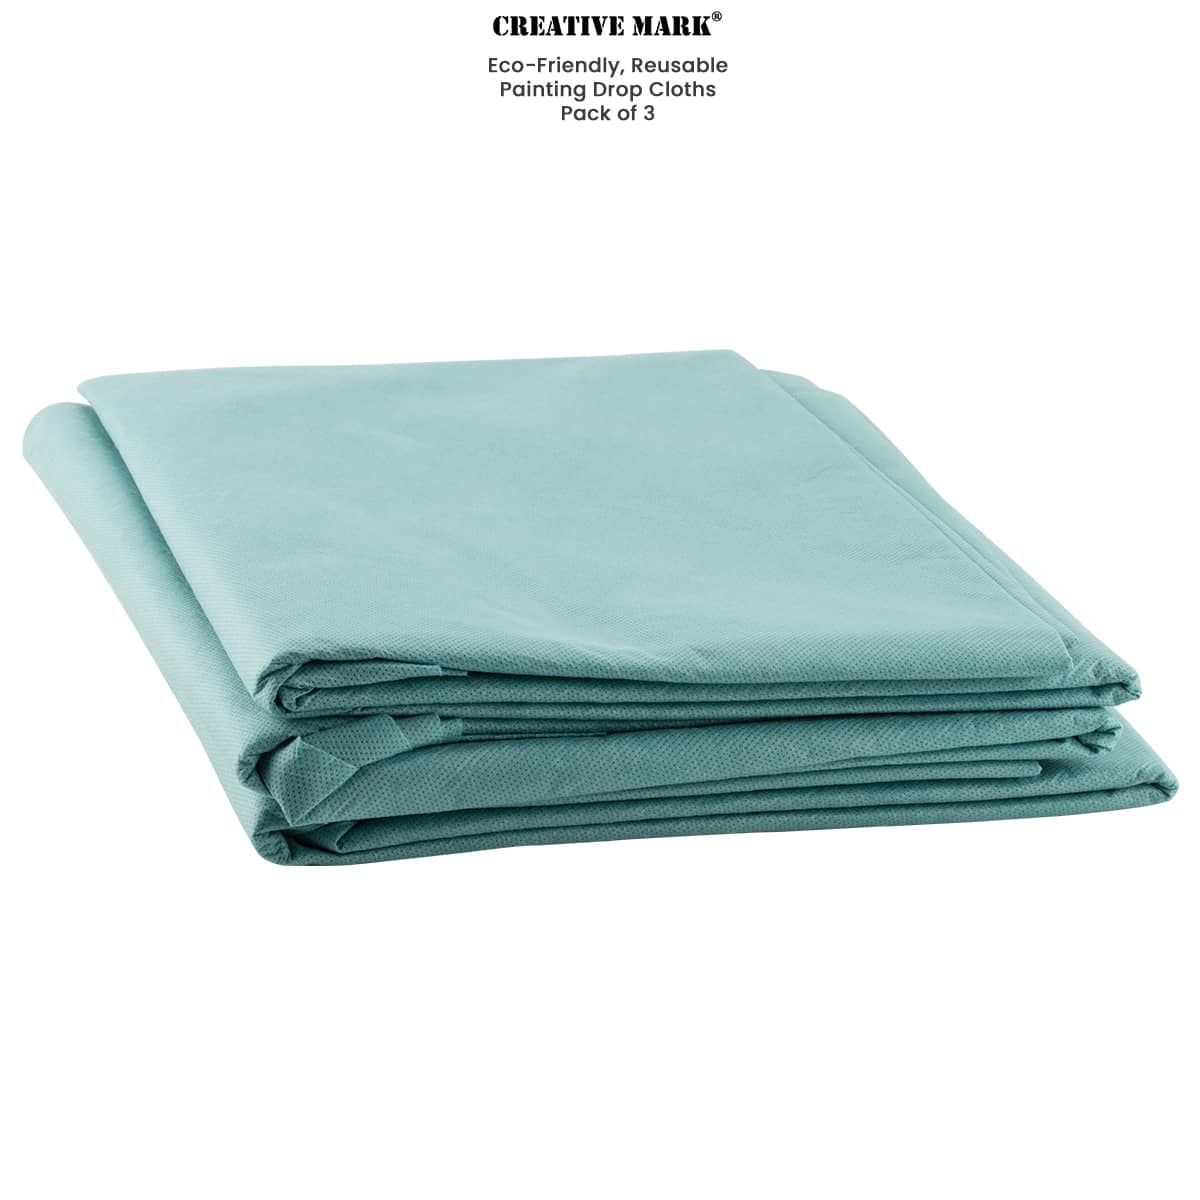 Reuseable Painting Drop Cloth 3-Pack 5' x 8